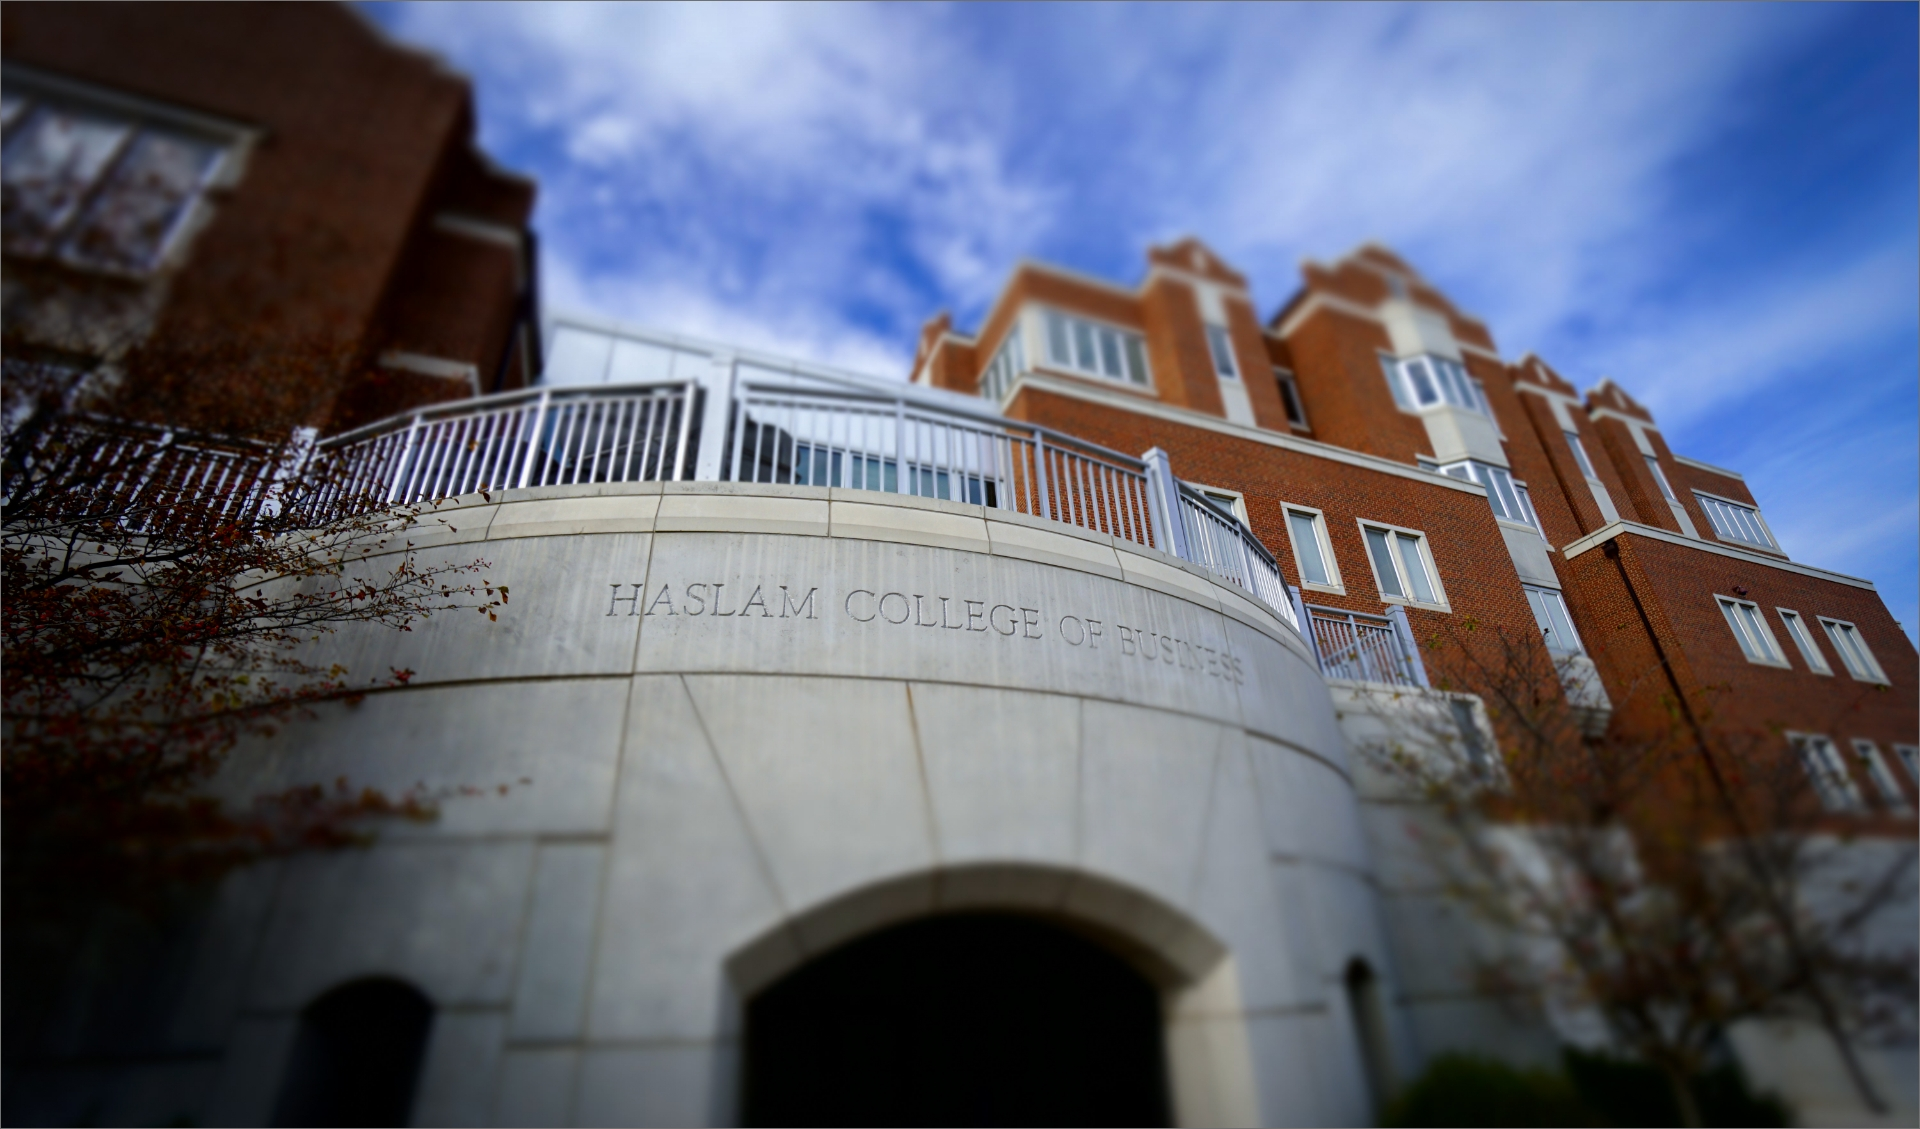 Haslam College of Business building exterior